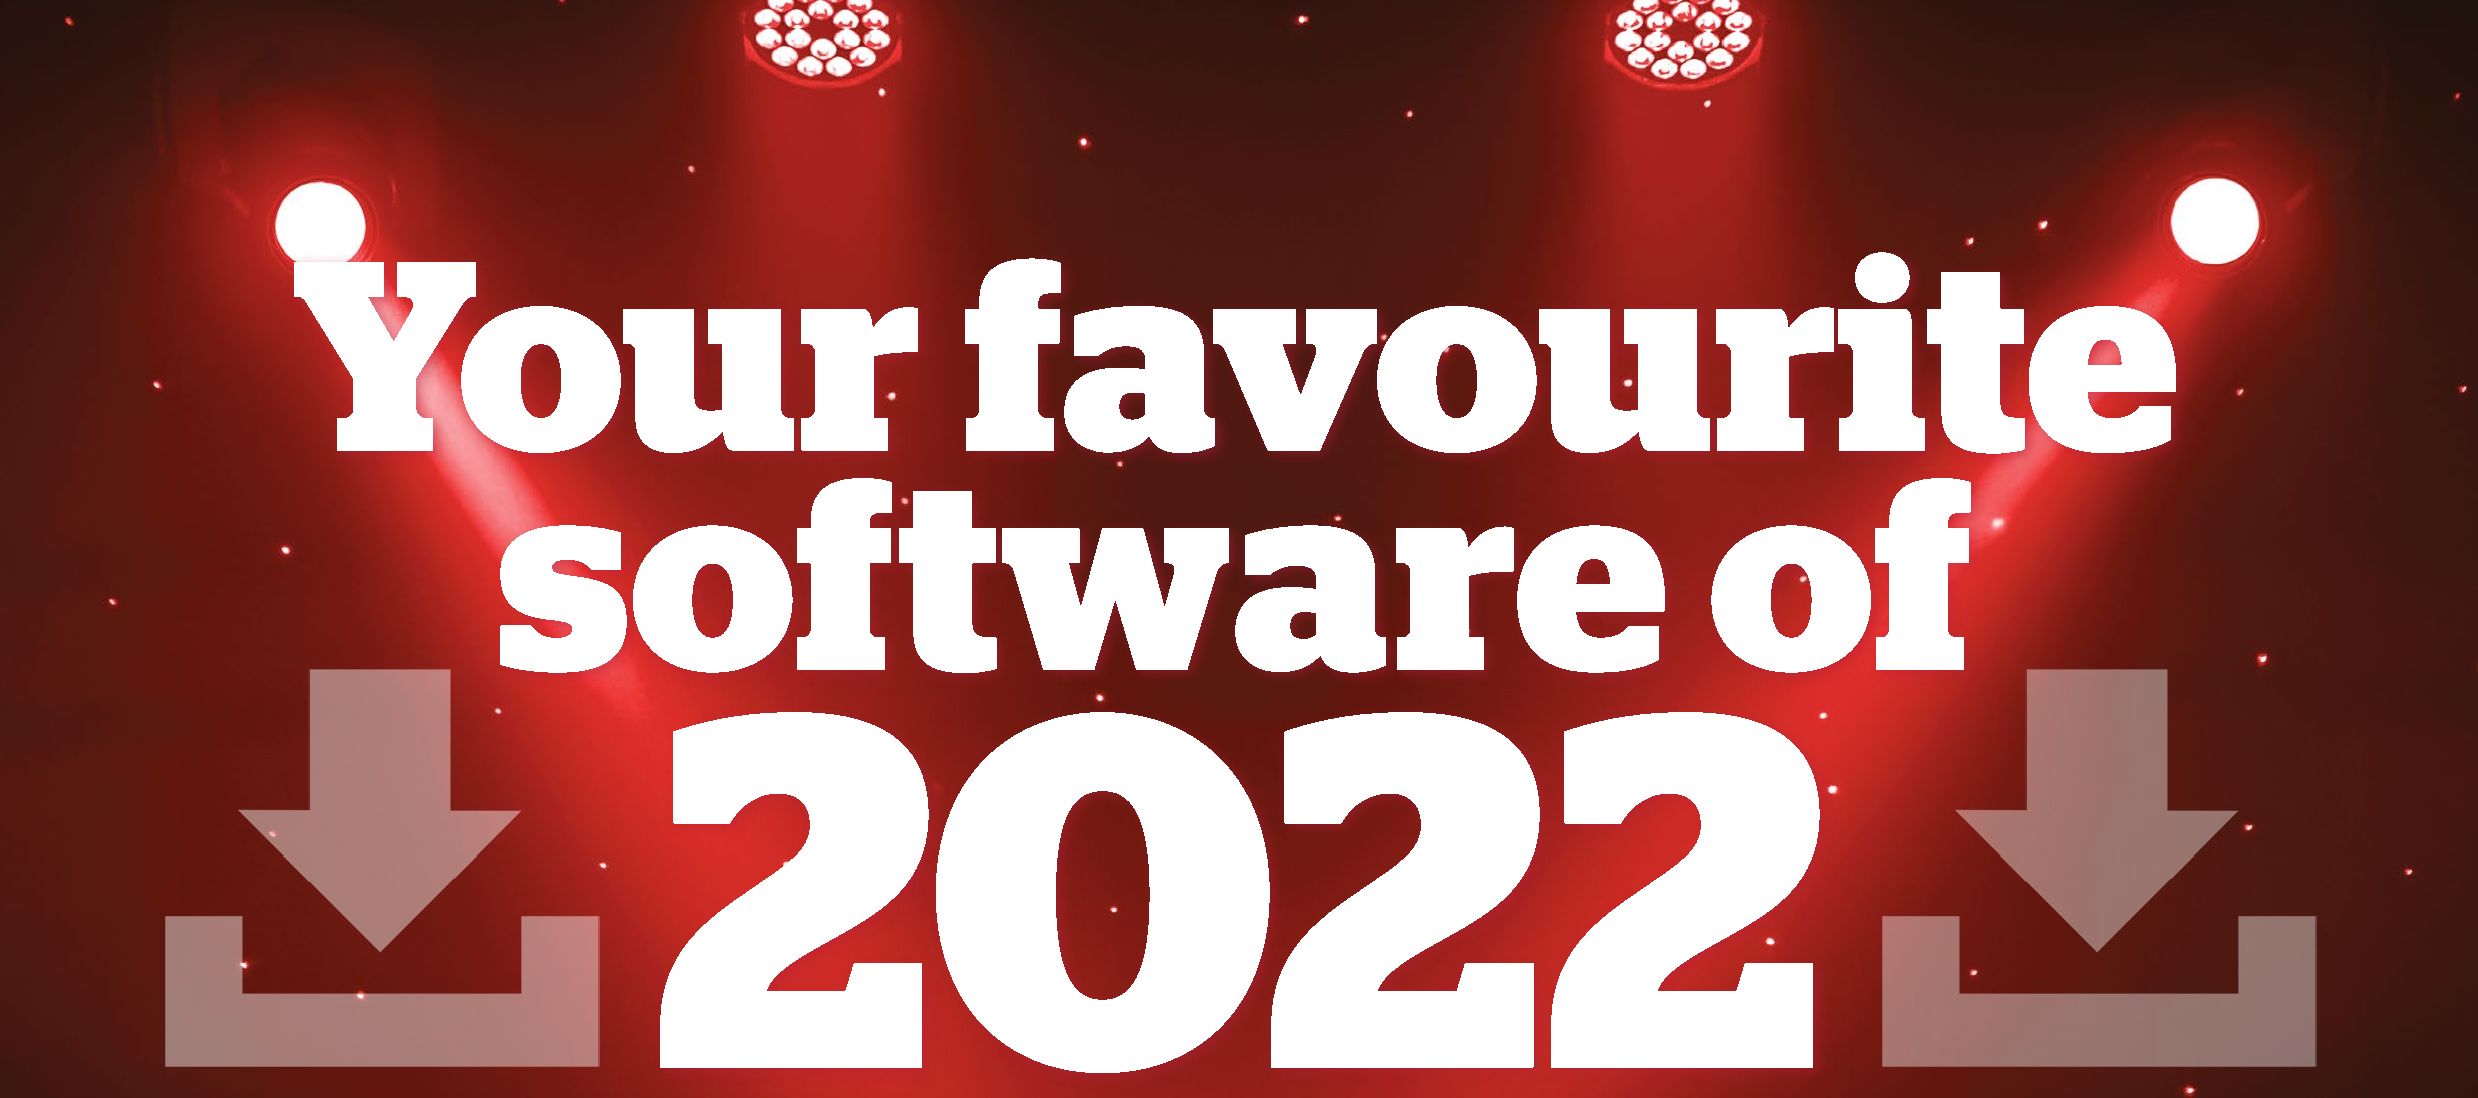 Your favourite software of 2022